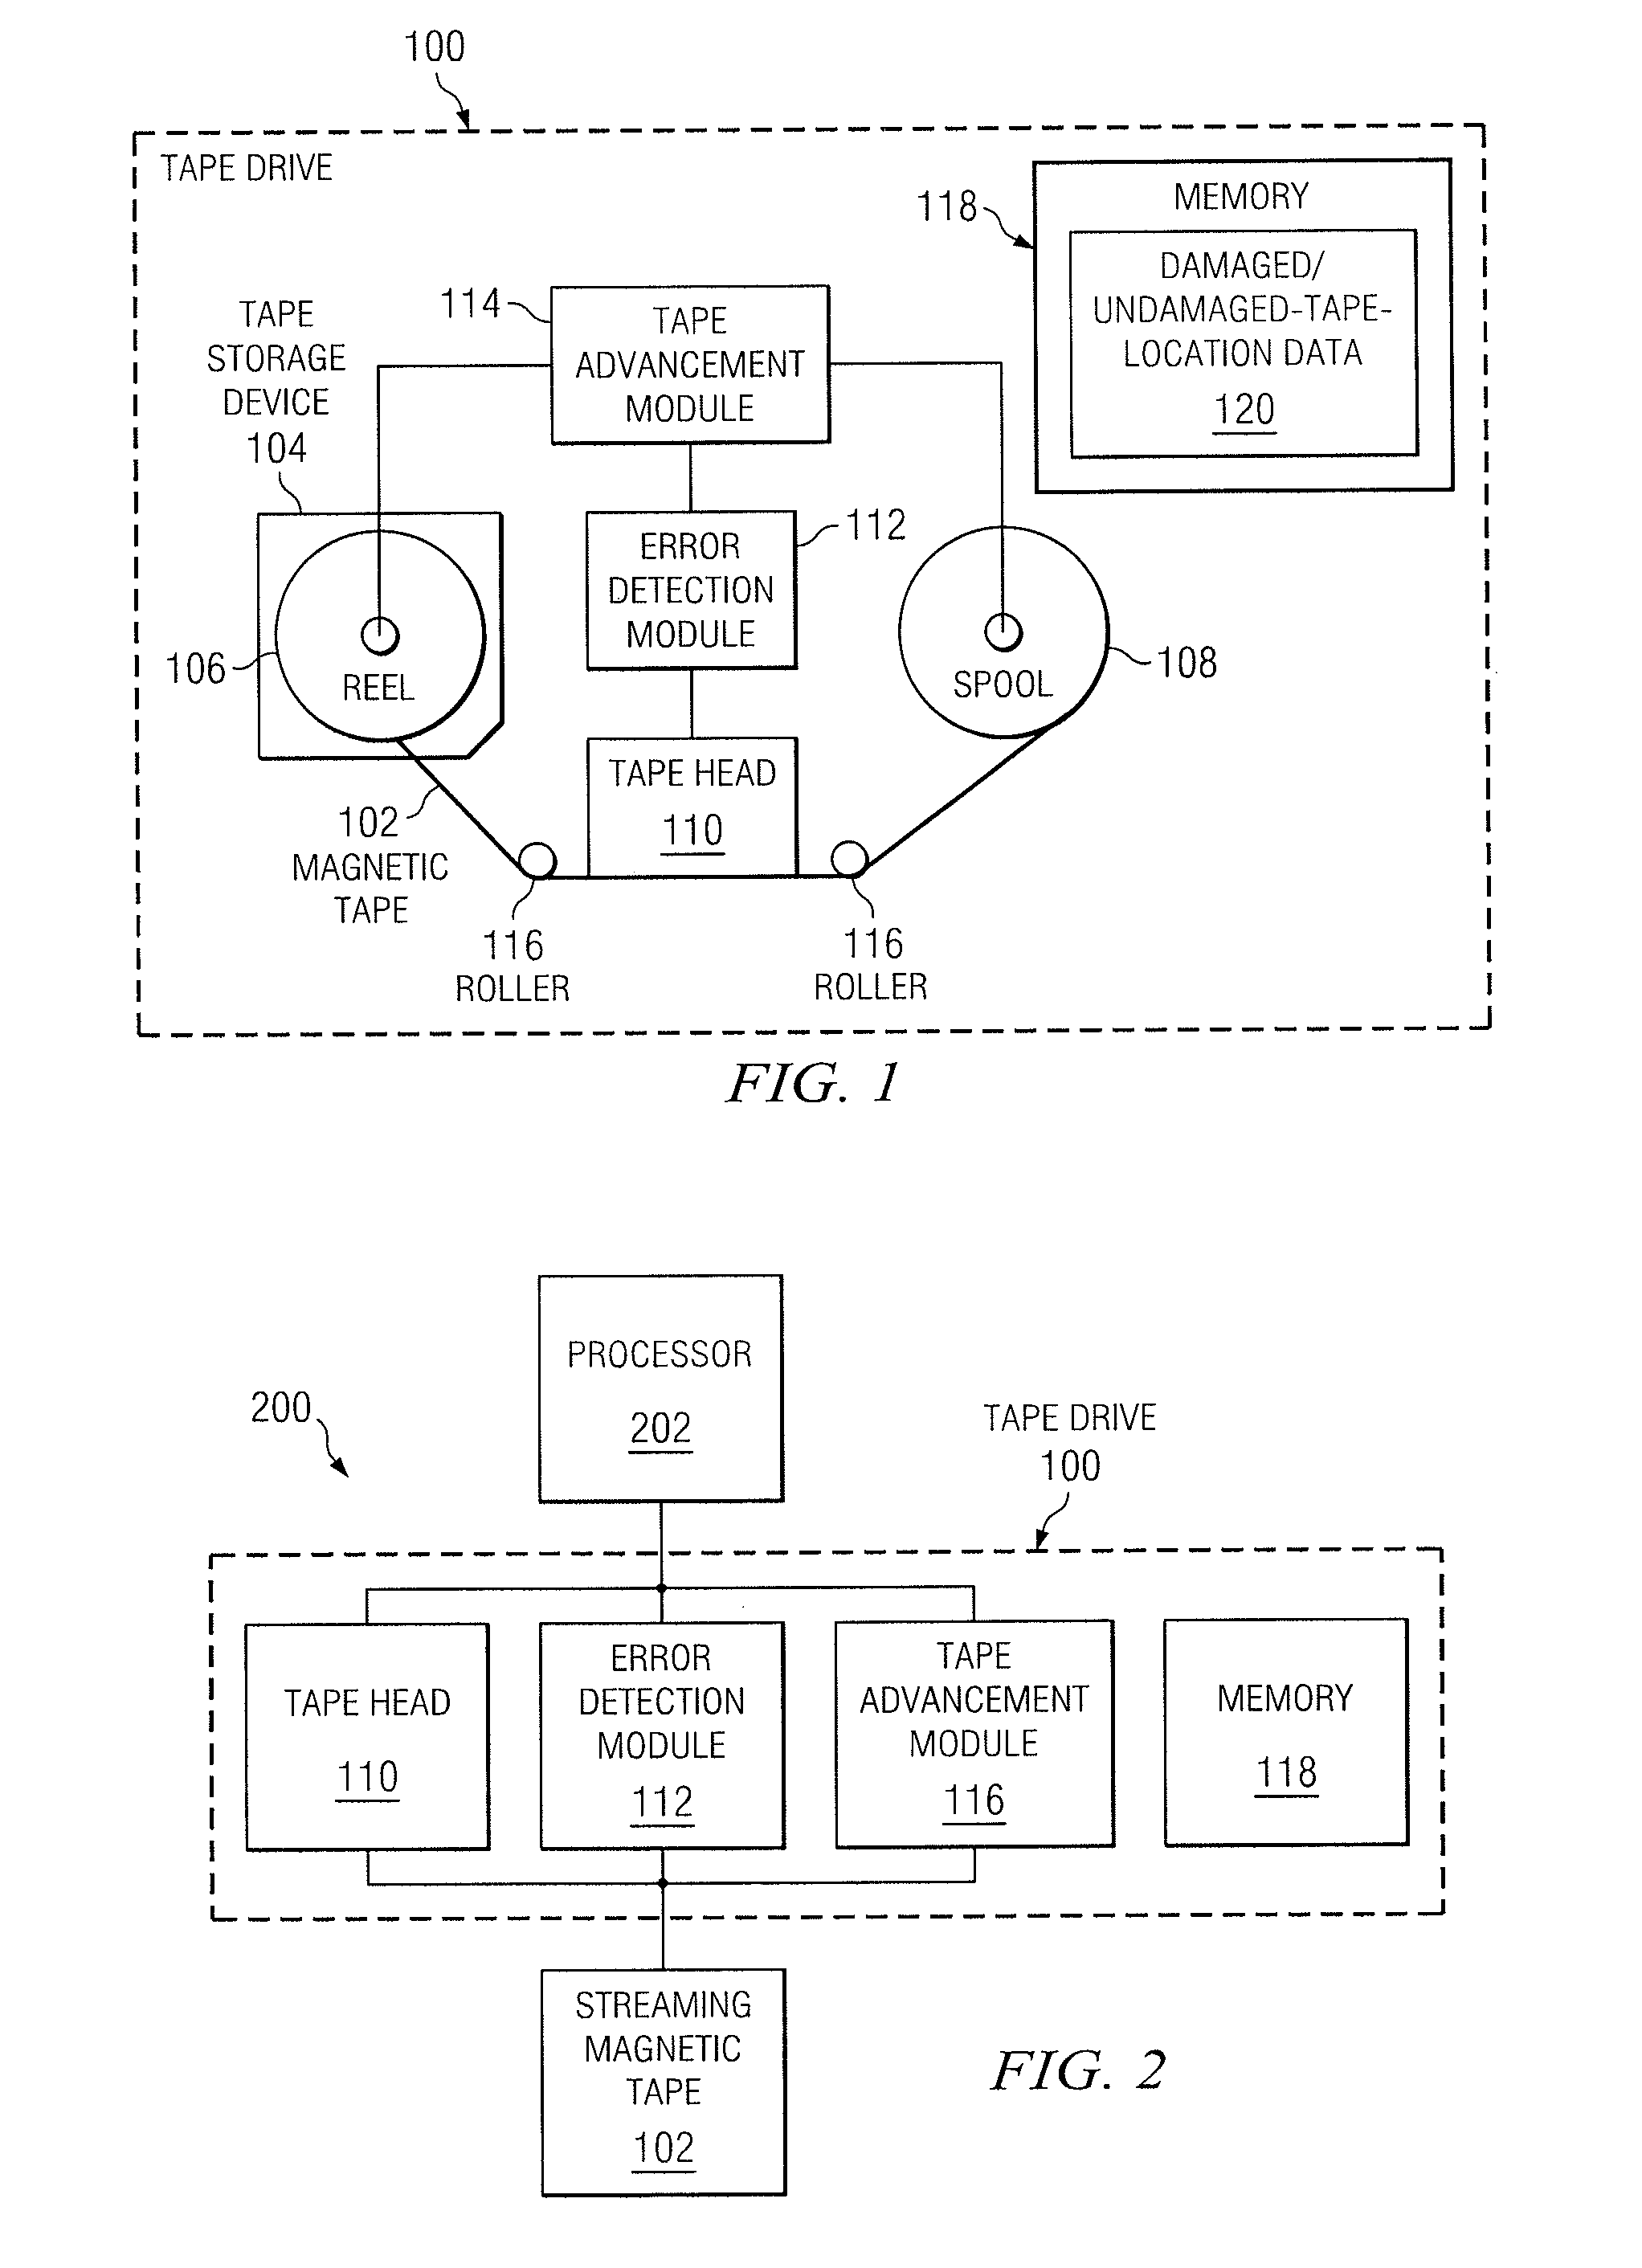 Systems and methods for storing data to magnetic tape having damaged areas